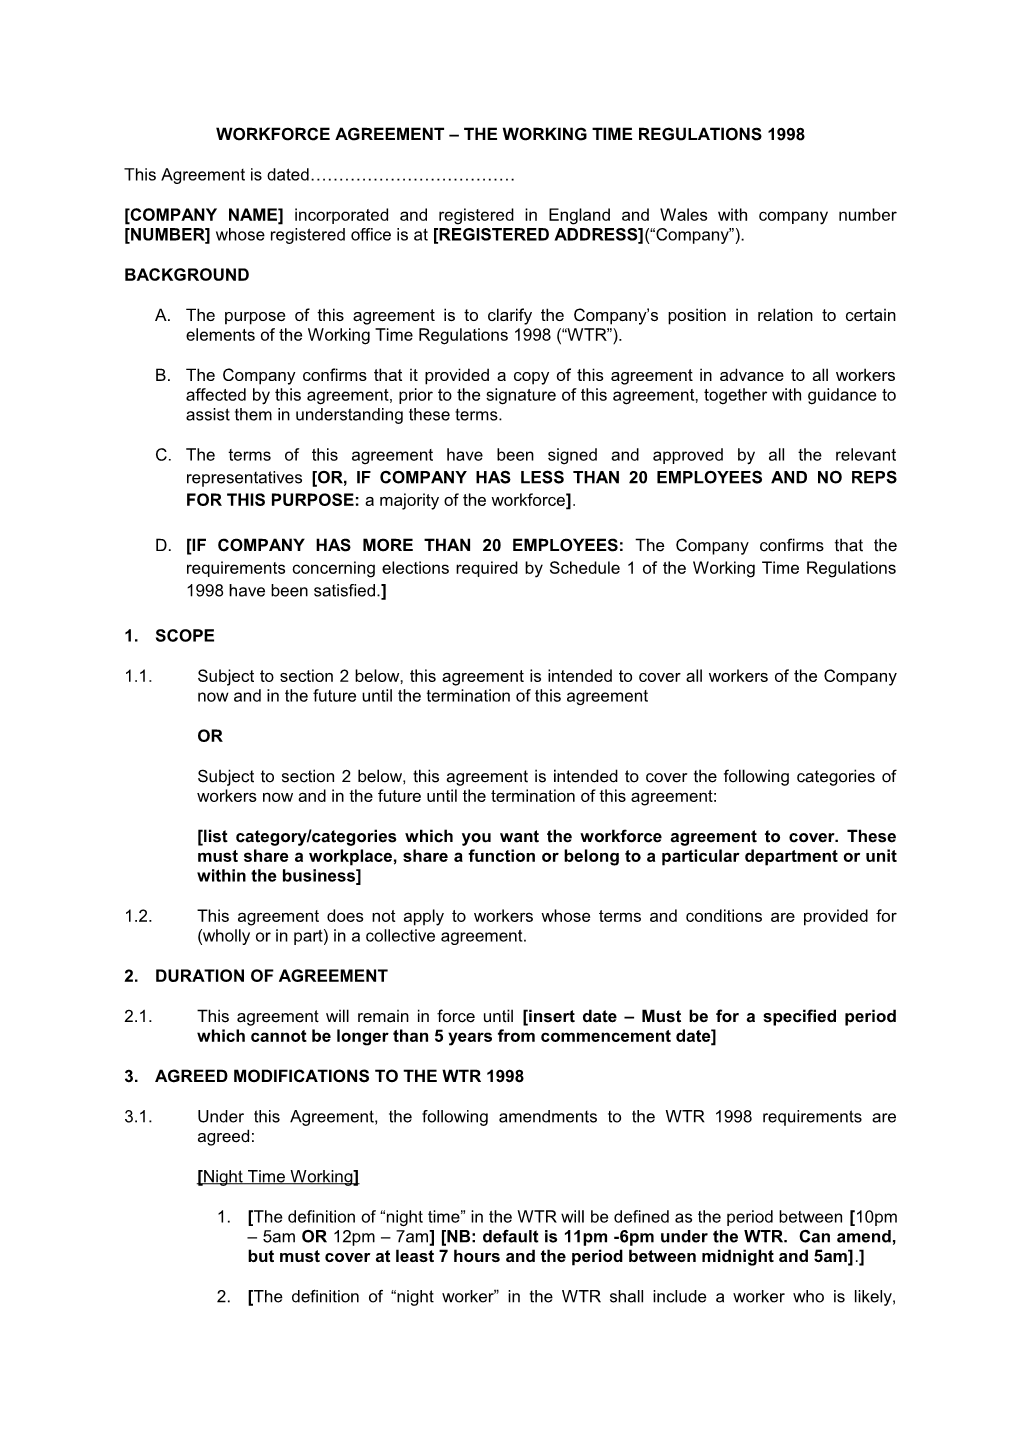 Workforce Agreement the Working Time Regulations 1998